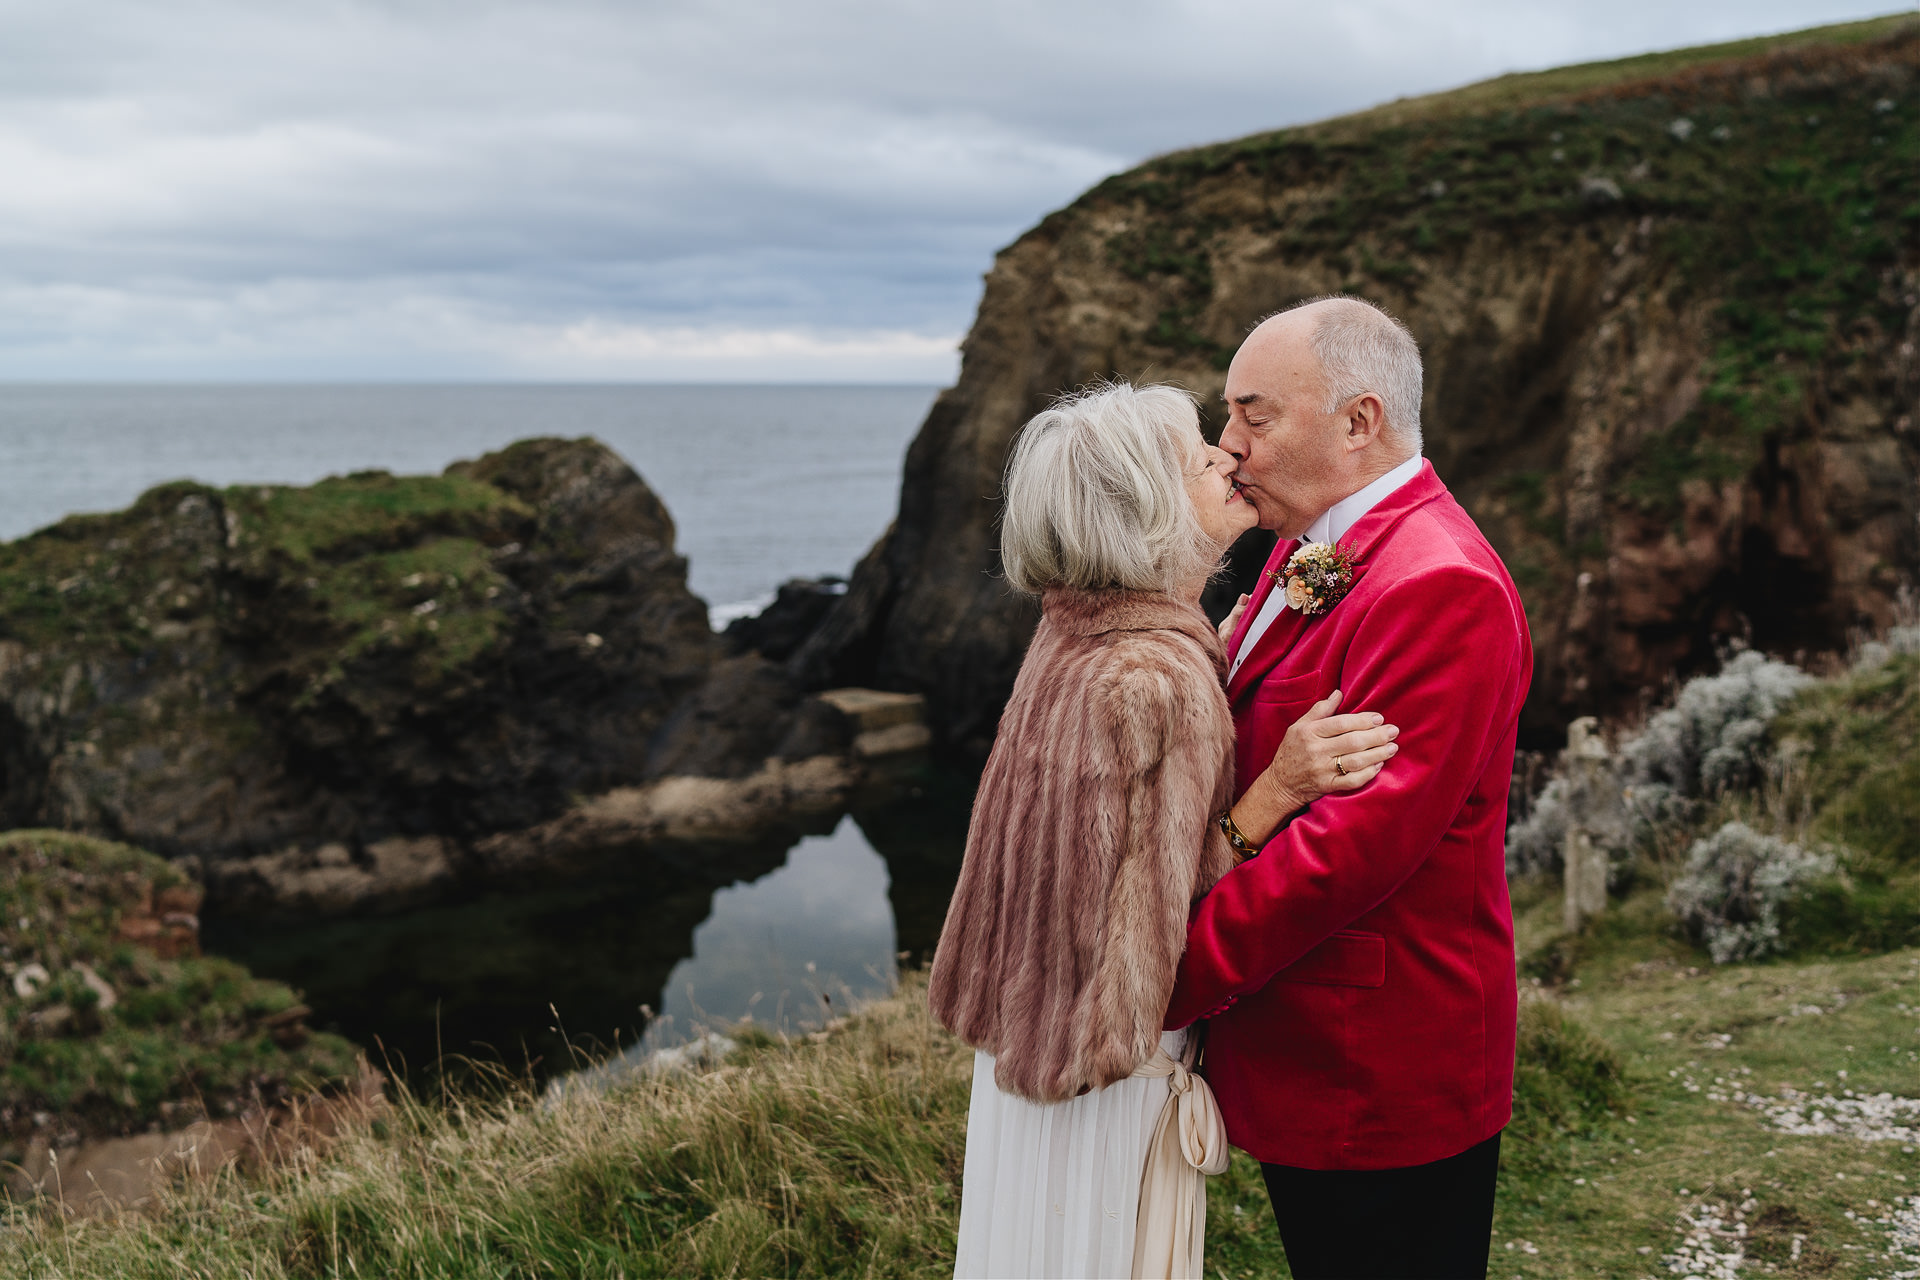 A couple eloping at Burgh Island in Devon